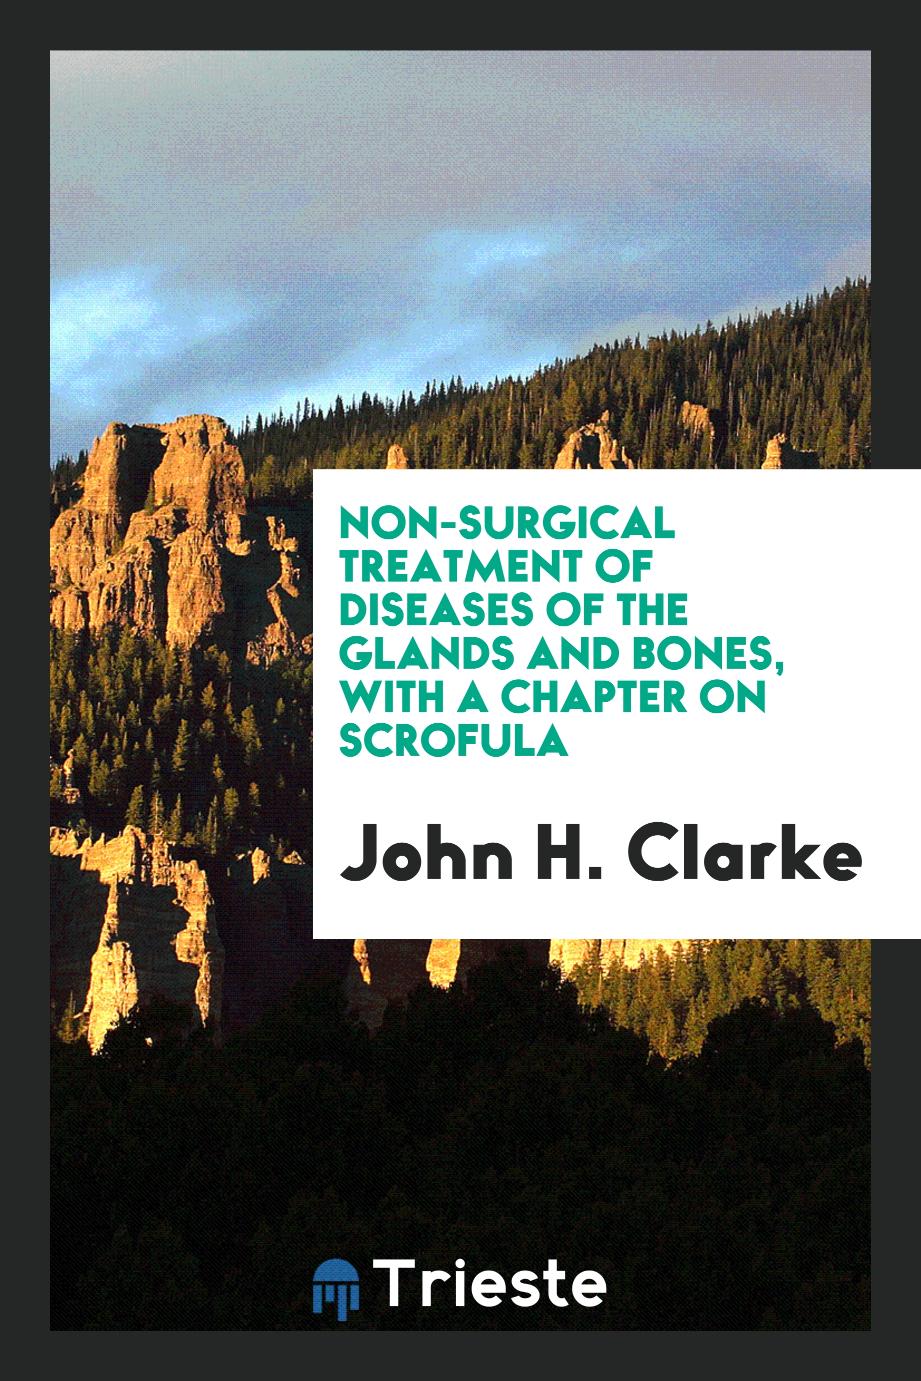 Non-Surgical Treatment of Diseases of the Glands and Bones, with a Chapter on Scrofula